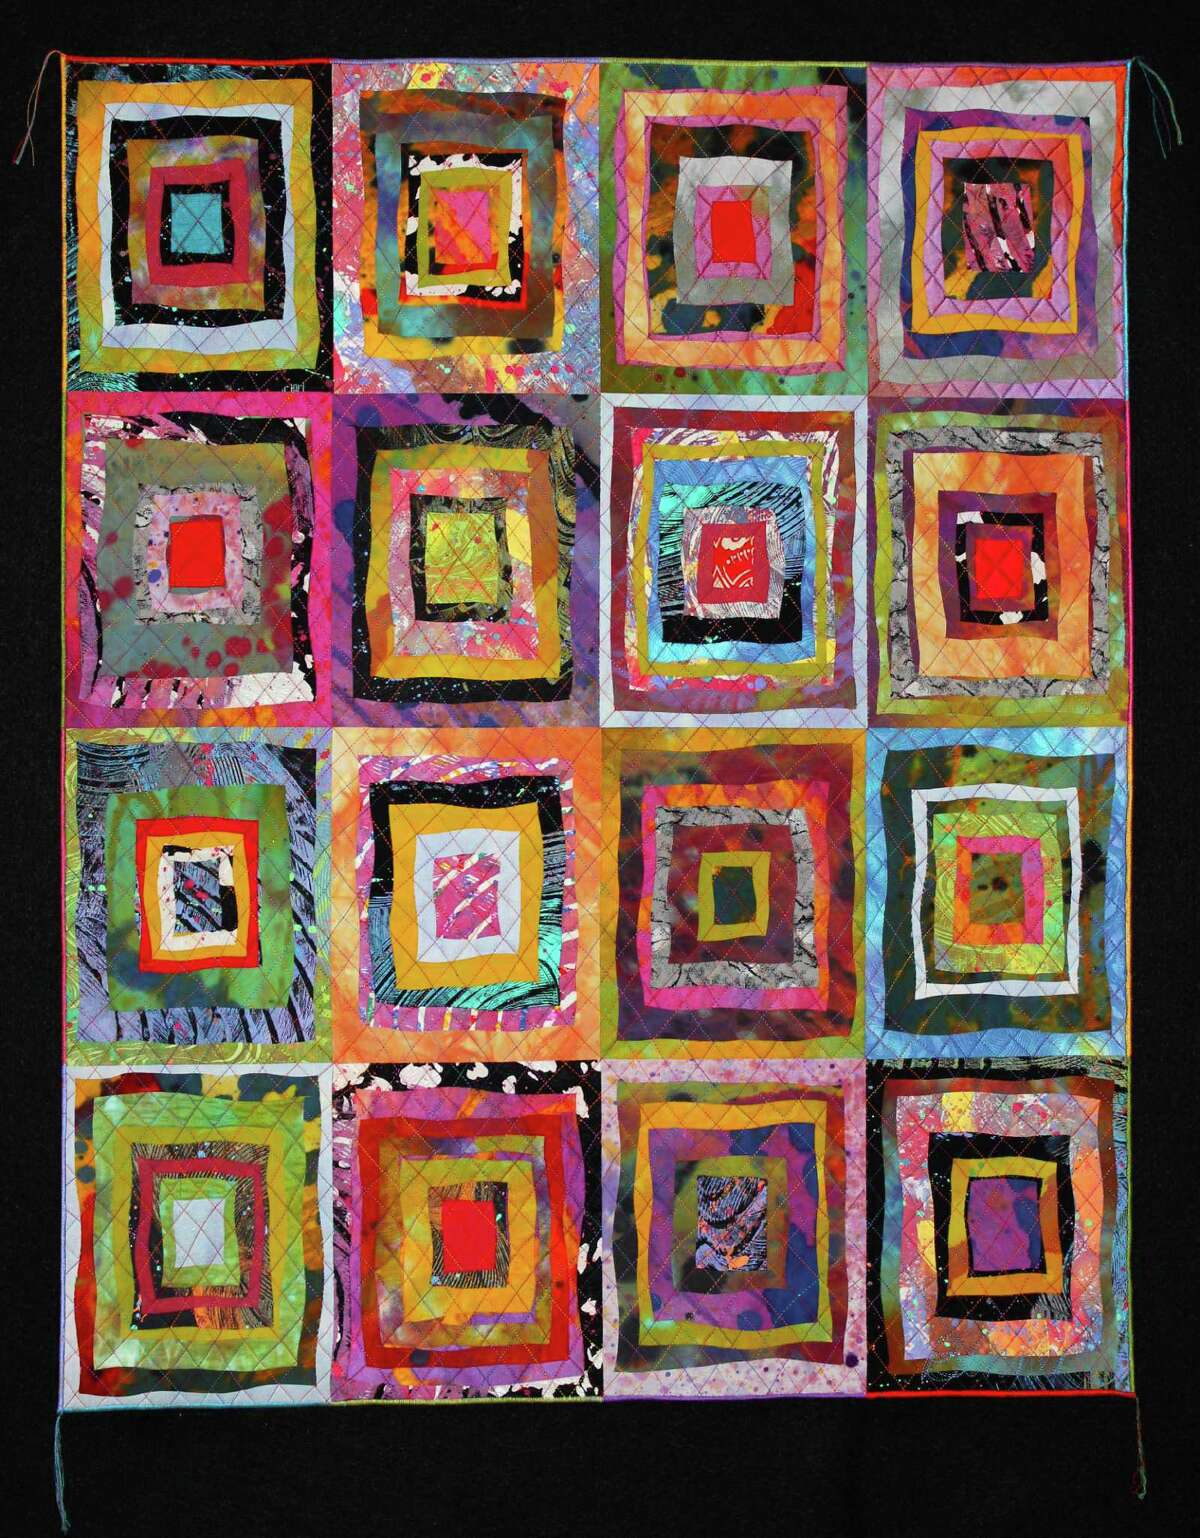 This quilt is part of the "Sue Benner: Circling the Square" exhibit on view April 2-June 28 at the Texas Quilt Museum in La Grange.